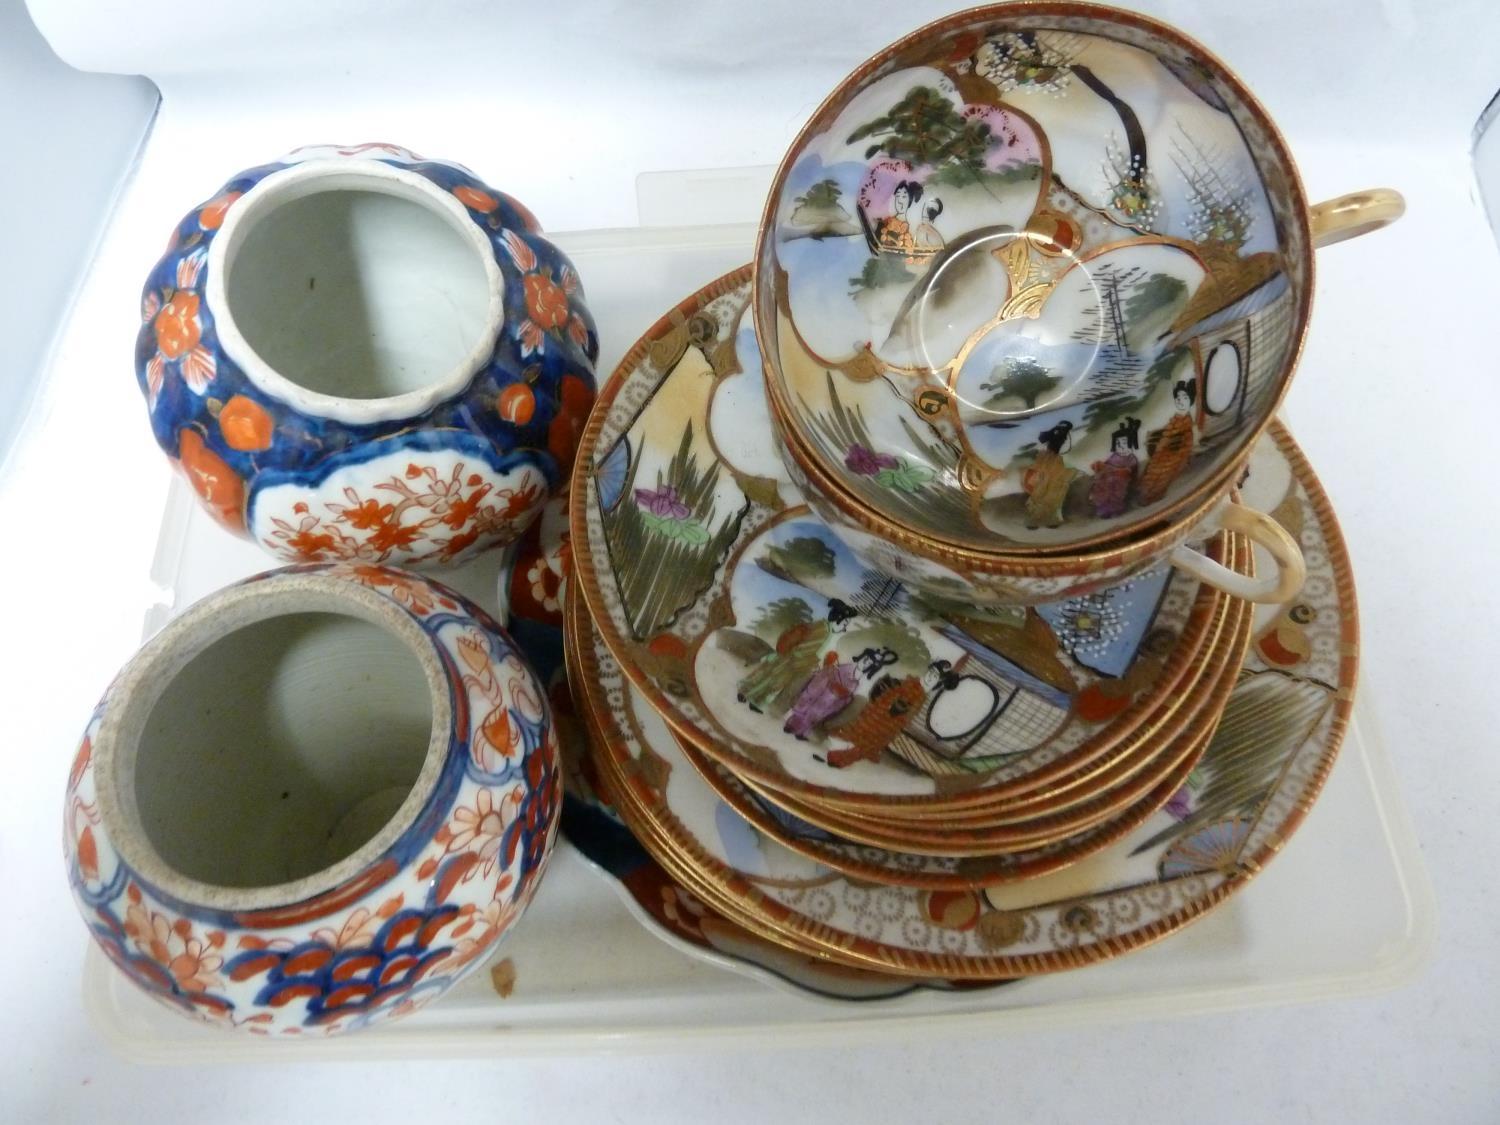 Japanese Imari porcelain - comprises a plate; and two vases, typically decorated in iron red and